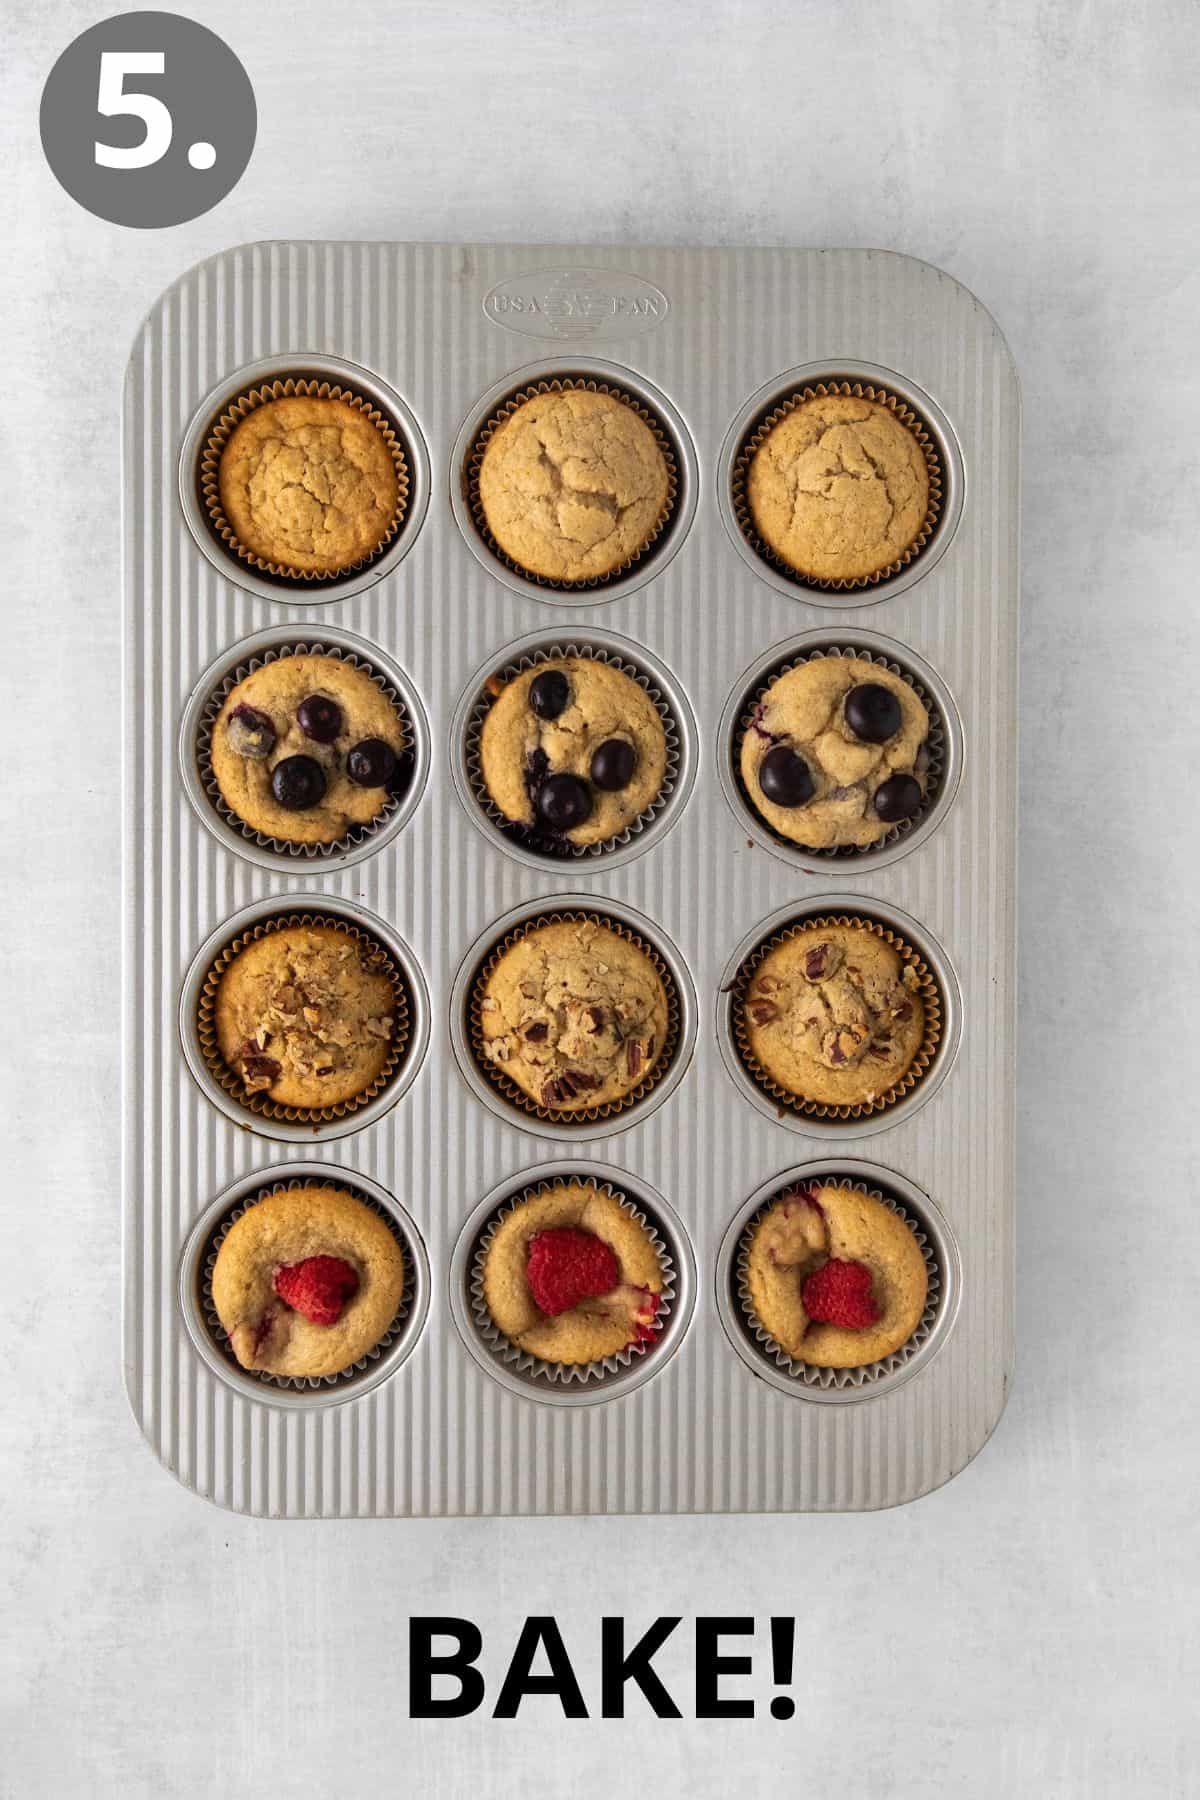 Baked oat flour muffins in a muffin tin